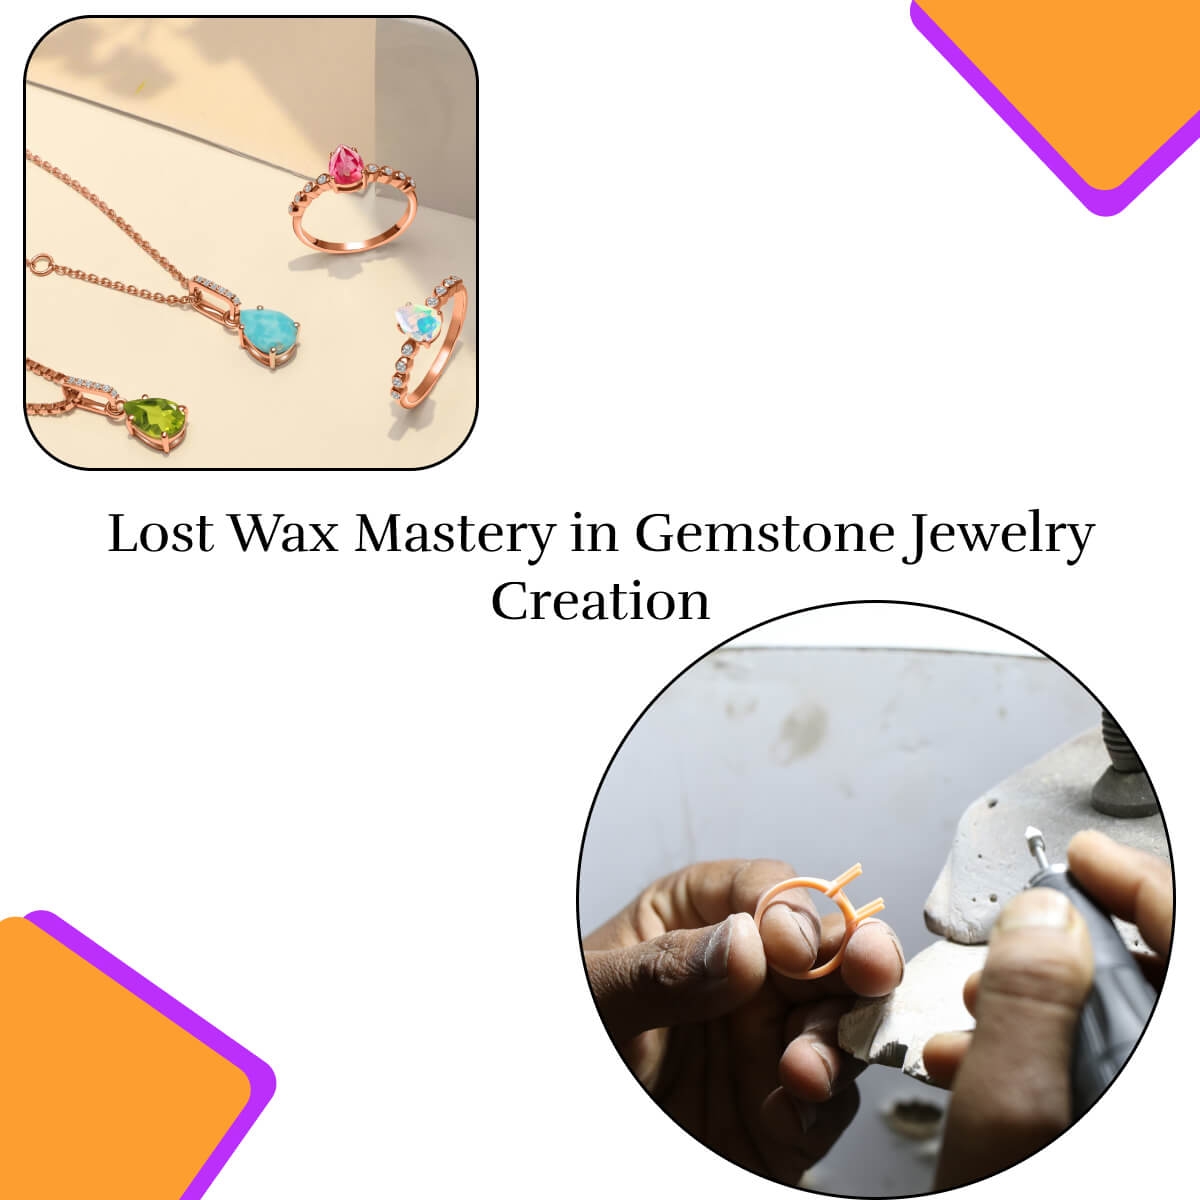 The Lost Wax Process An Integral Part of Wholesale Gemstone Jewelry Manufacturing